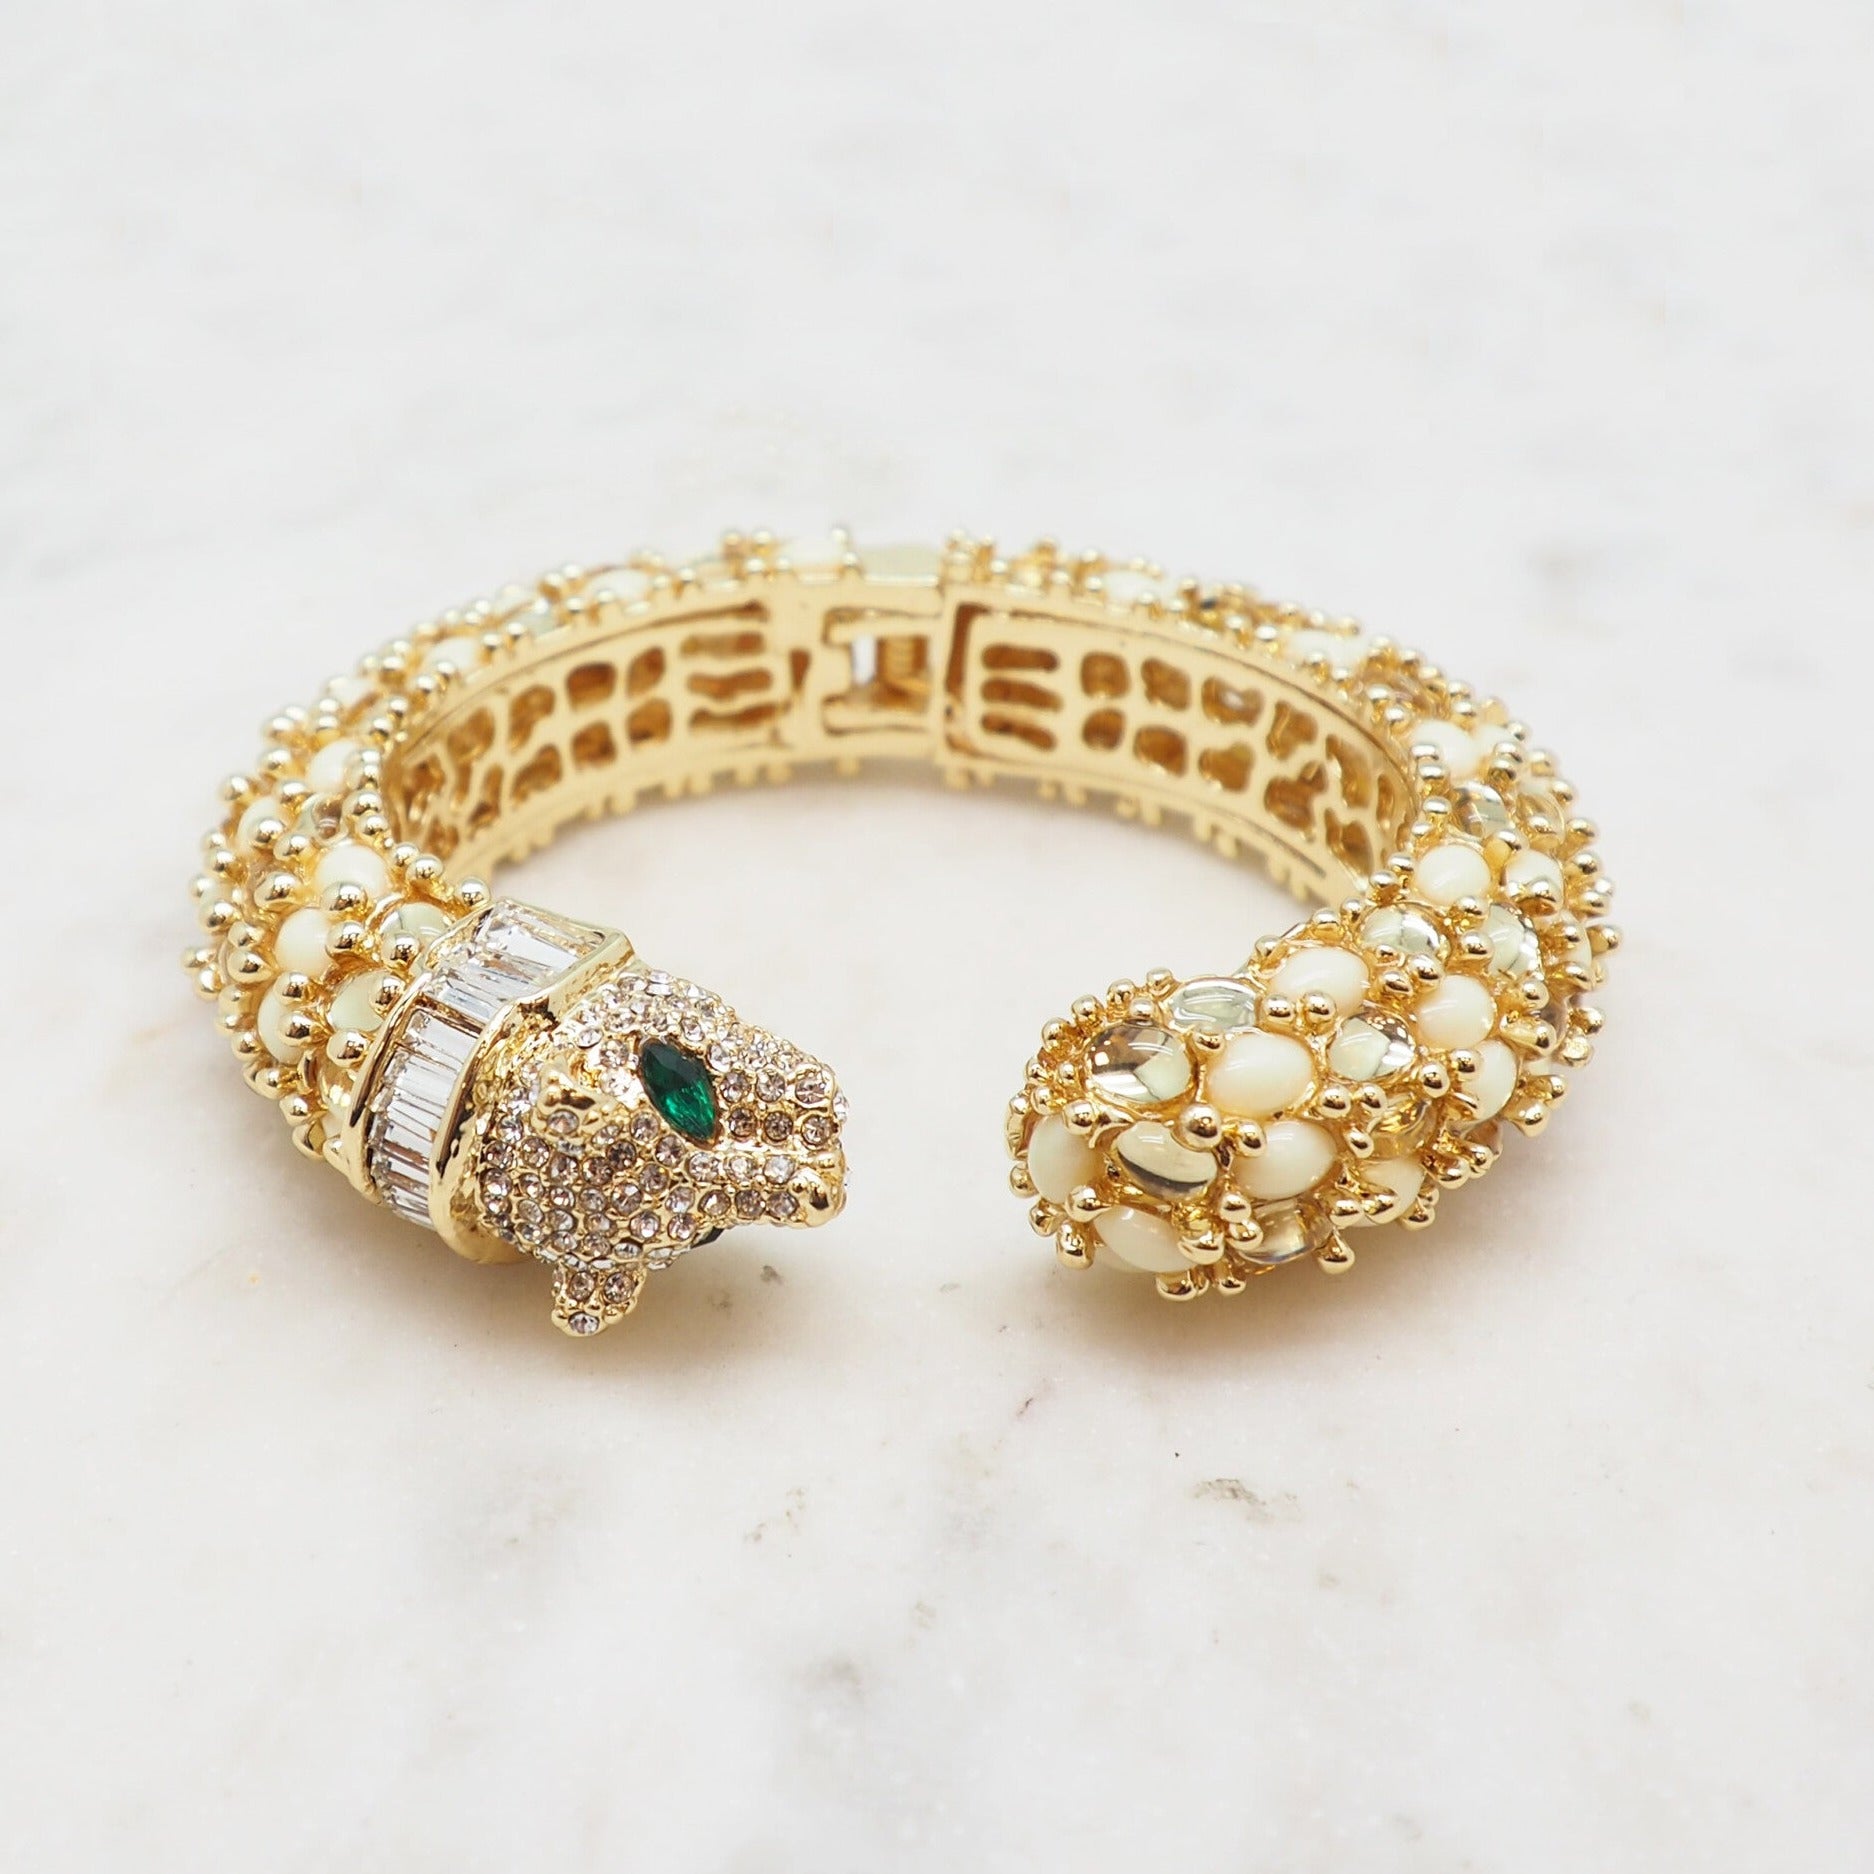 The Tiger Bangle - White and Gold